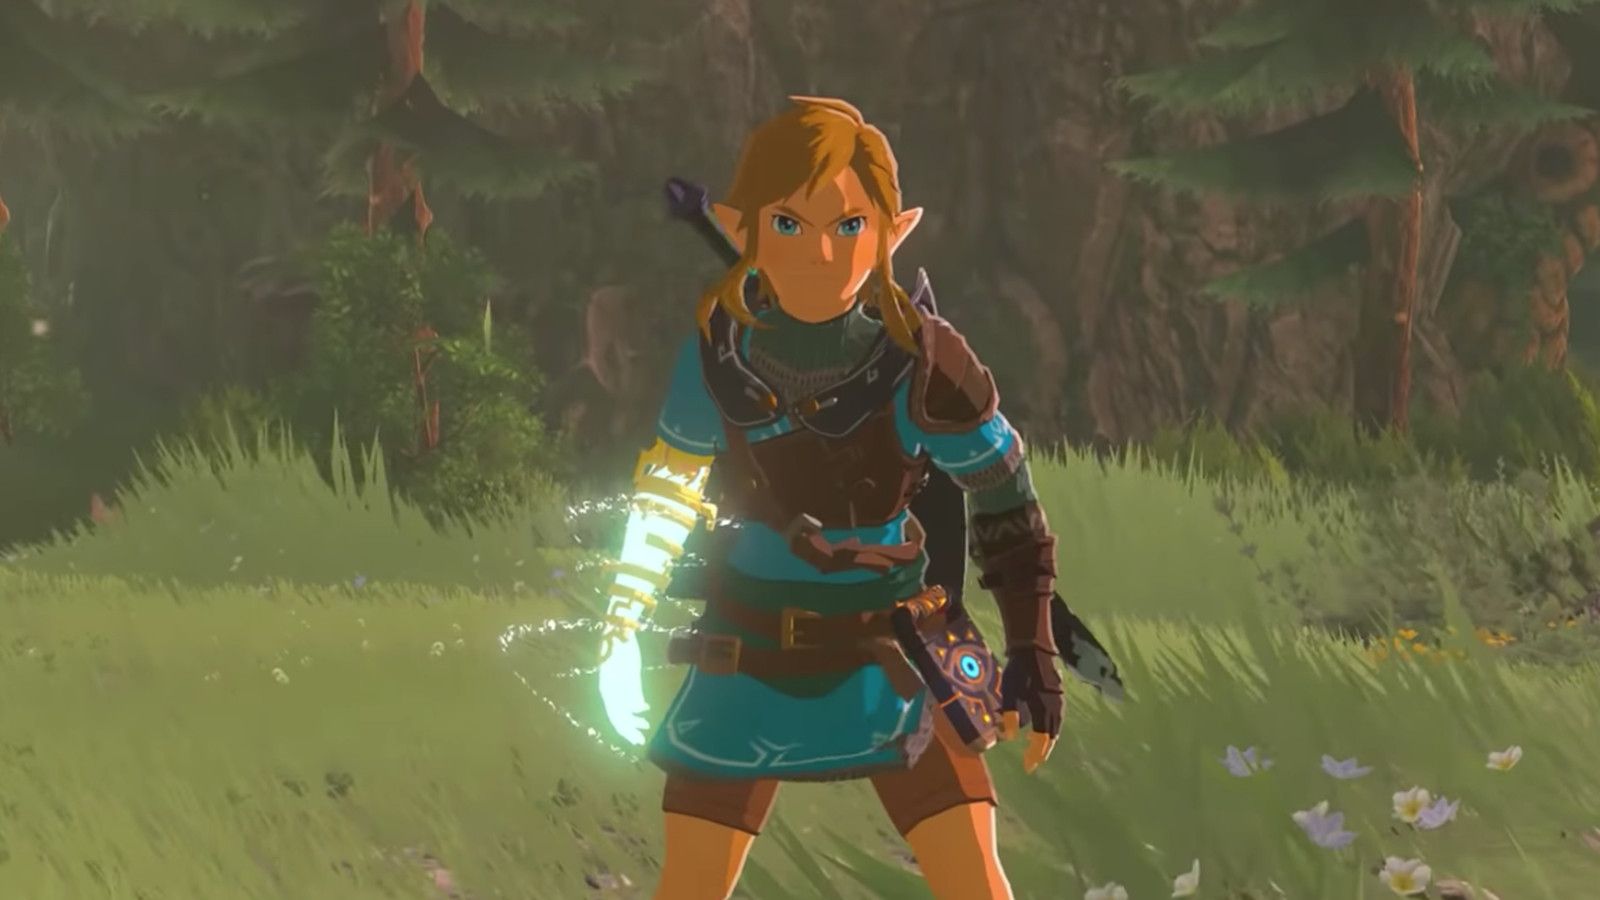 Legend of Zelda movie director says film needs to be ‘grounded’ and ‘real,’ versus motion capture